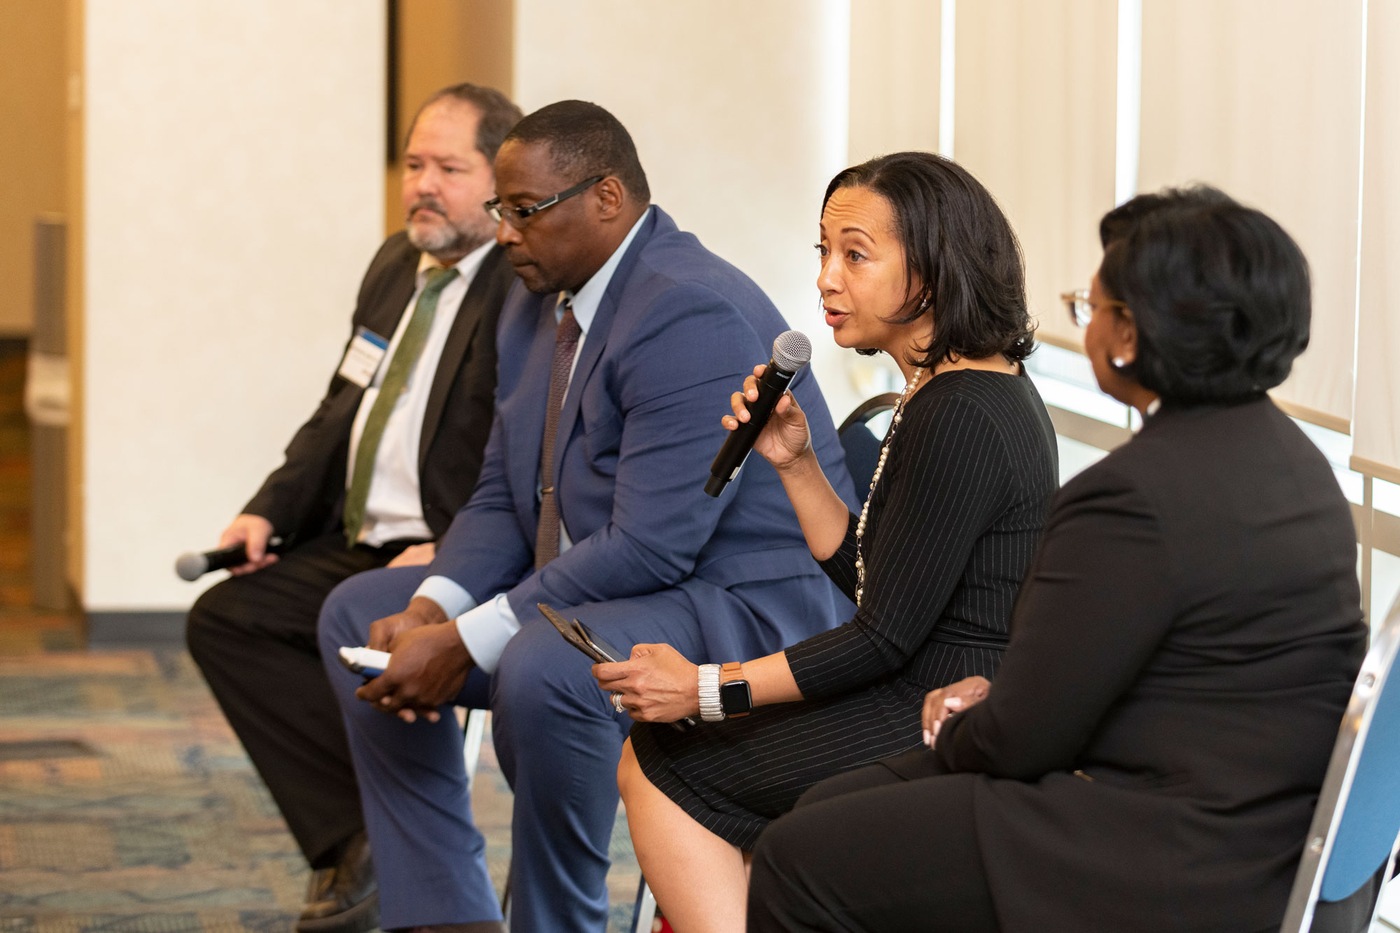 Panel participants discuss civil rights cold cases at the Beacon Regional Conference, held March 8, 2022 in Jackson, Mississippi.